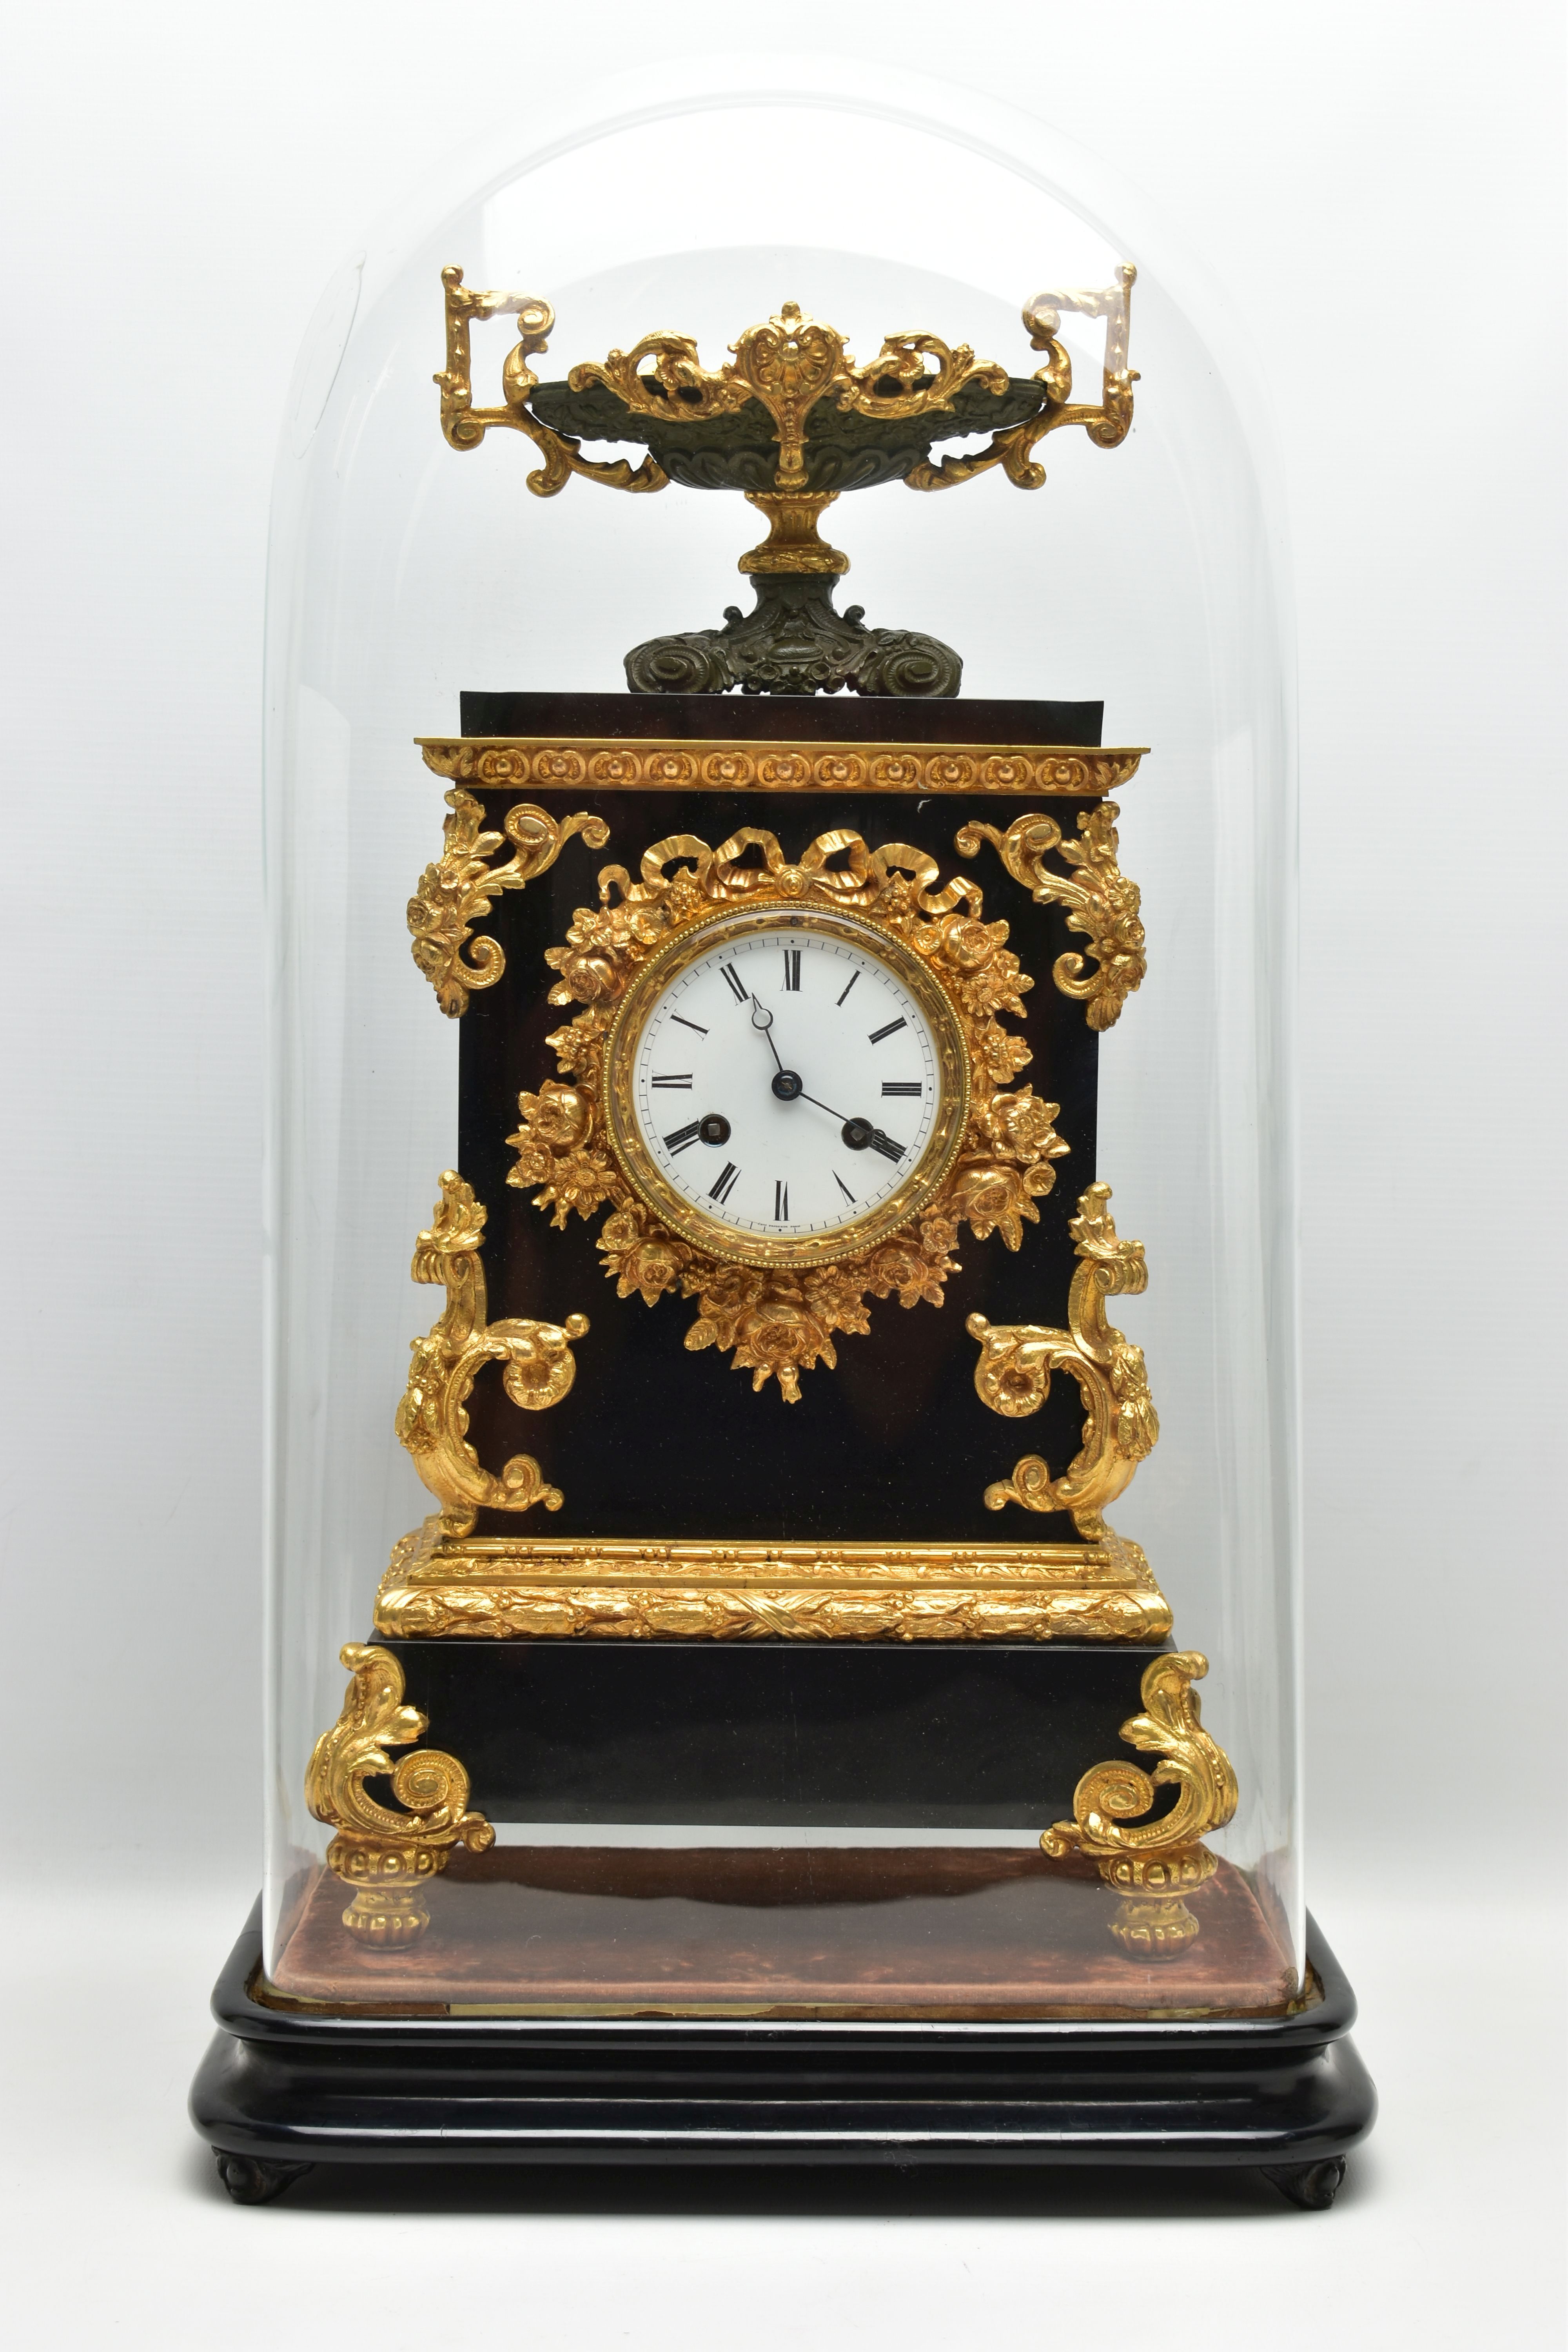 A LATE 19TH CENTURY BLACK SLATE AND GILT METAL CHARLES FRODSHAM OF PARIS MANTEL CLOCK UNDER A